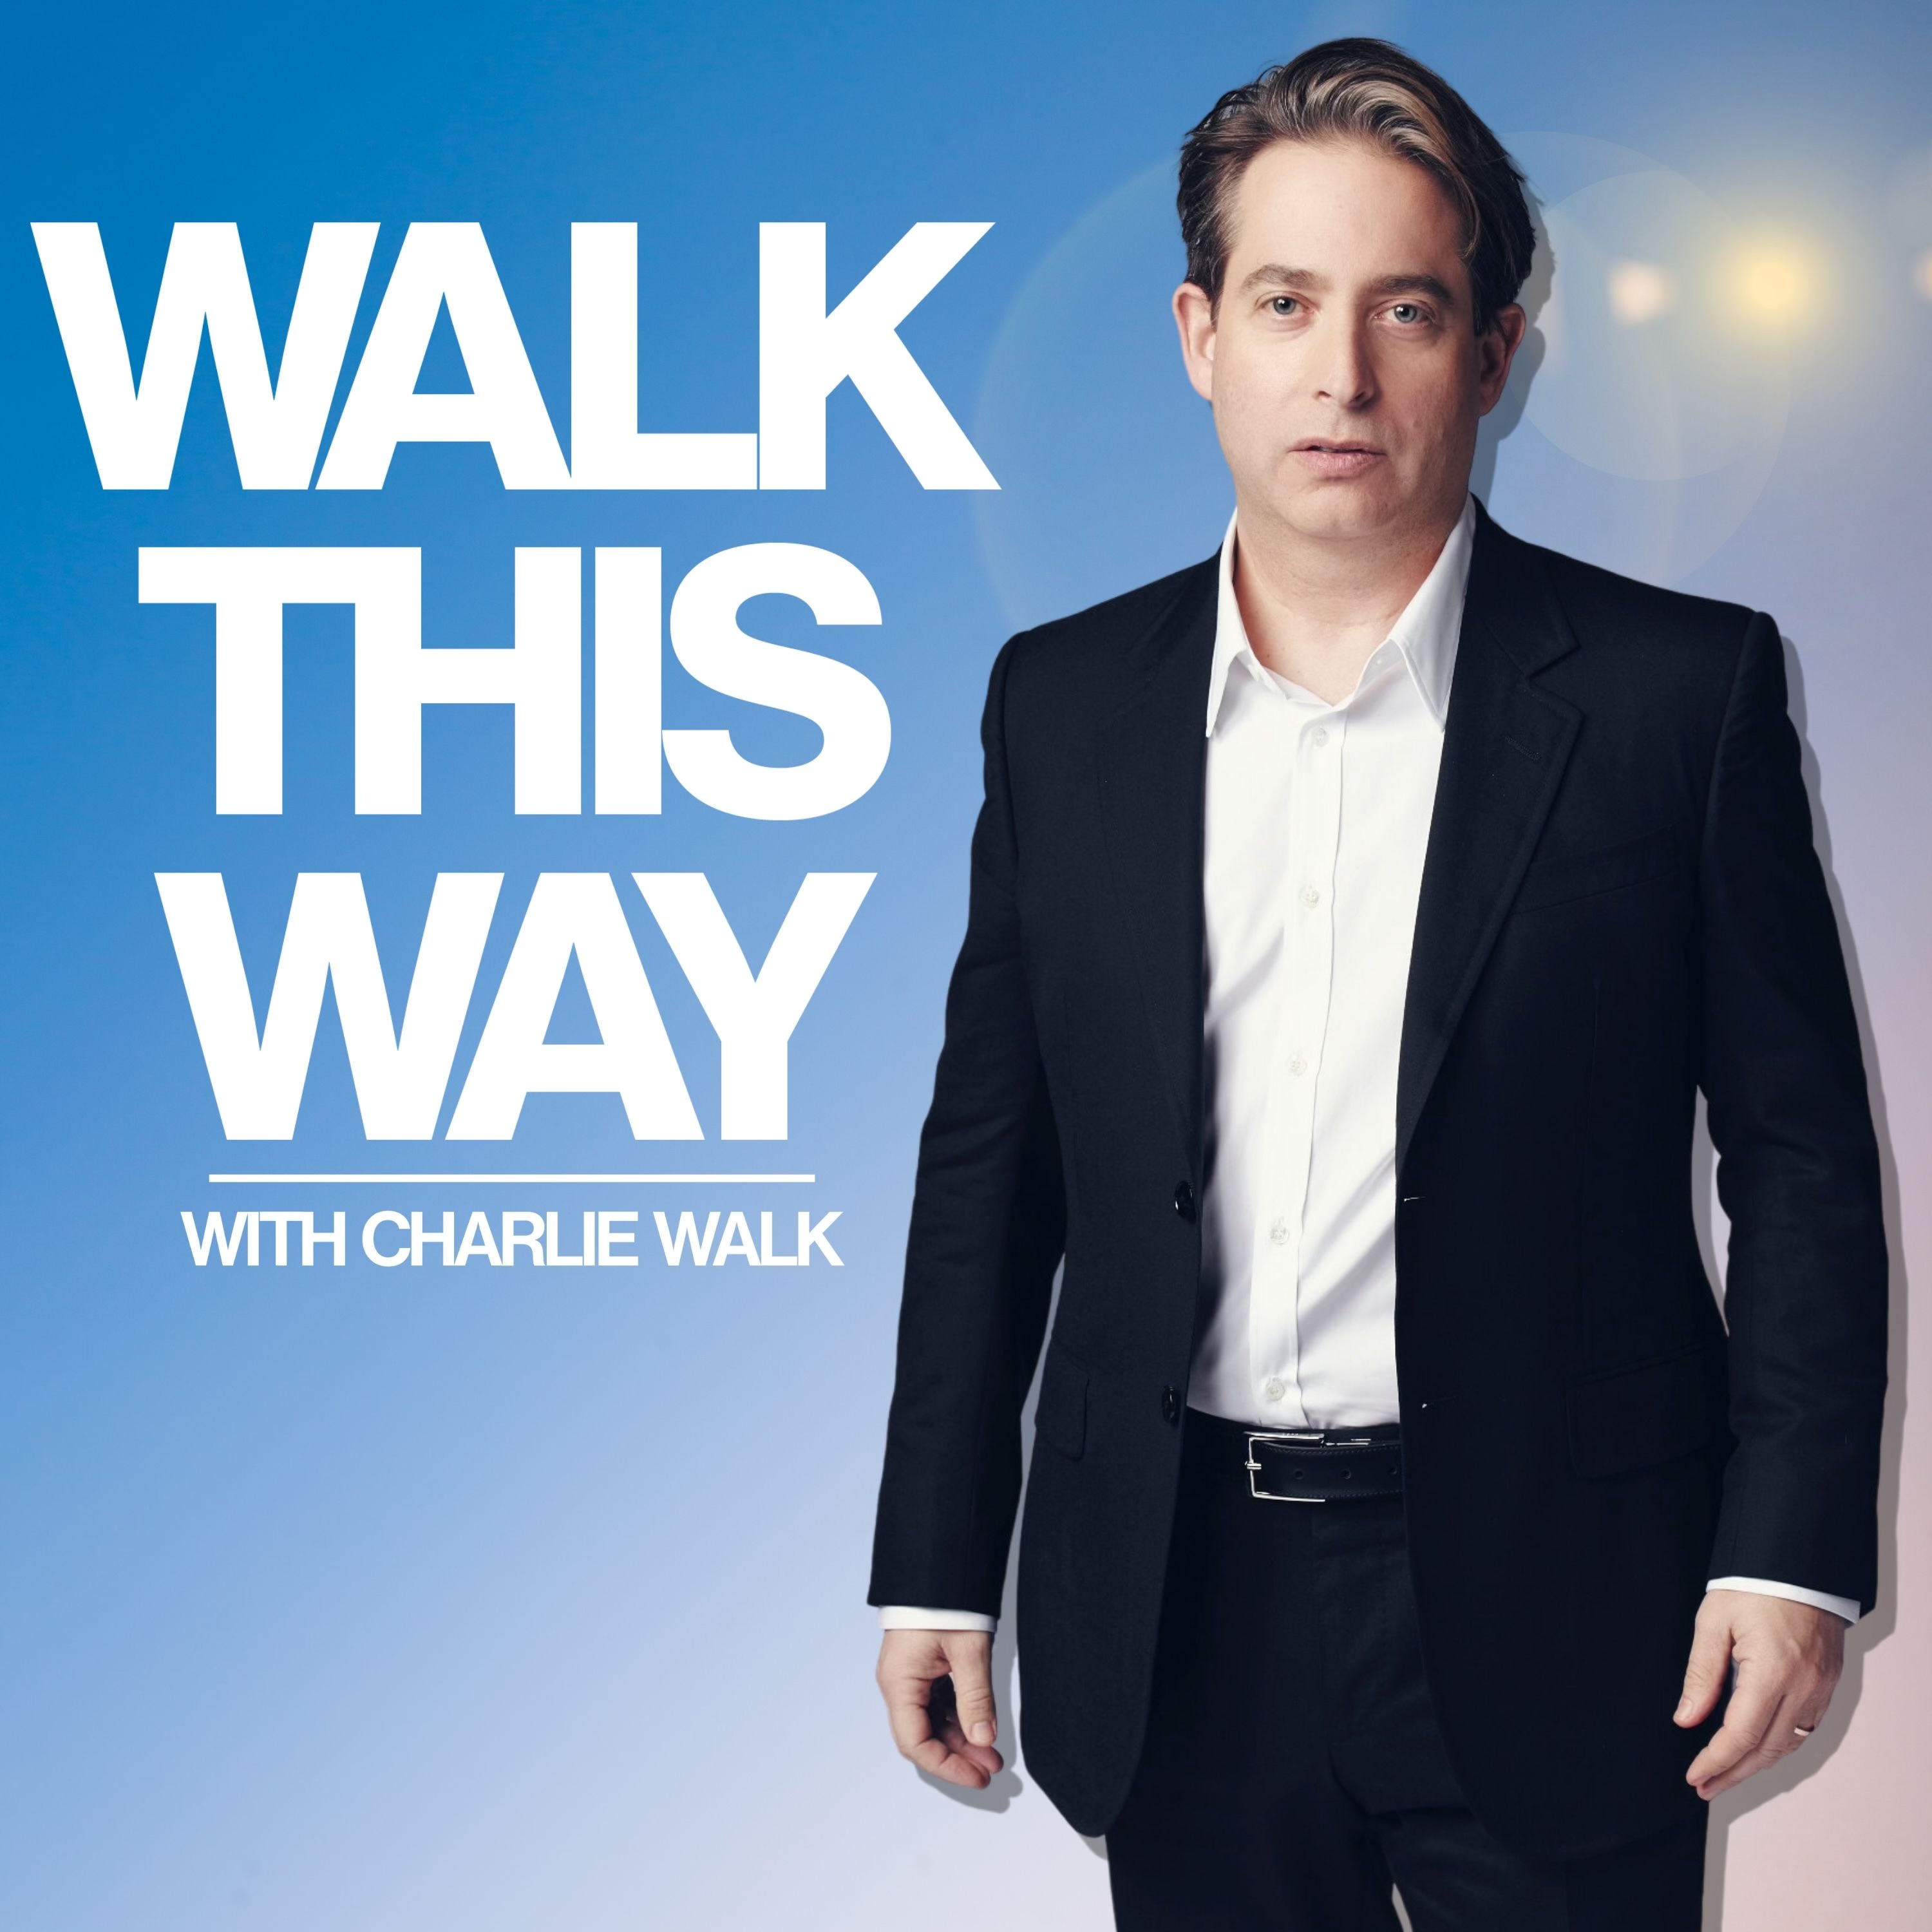 Charlie Walk and Sarah Prout Discuss the Power of Manifestation on the Walk this Way Podcast